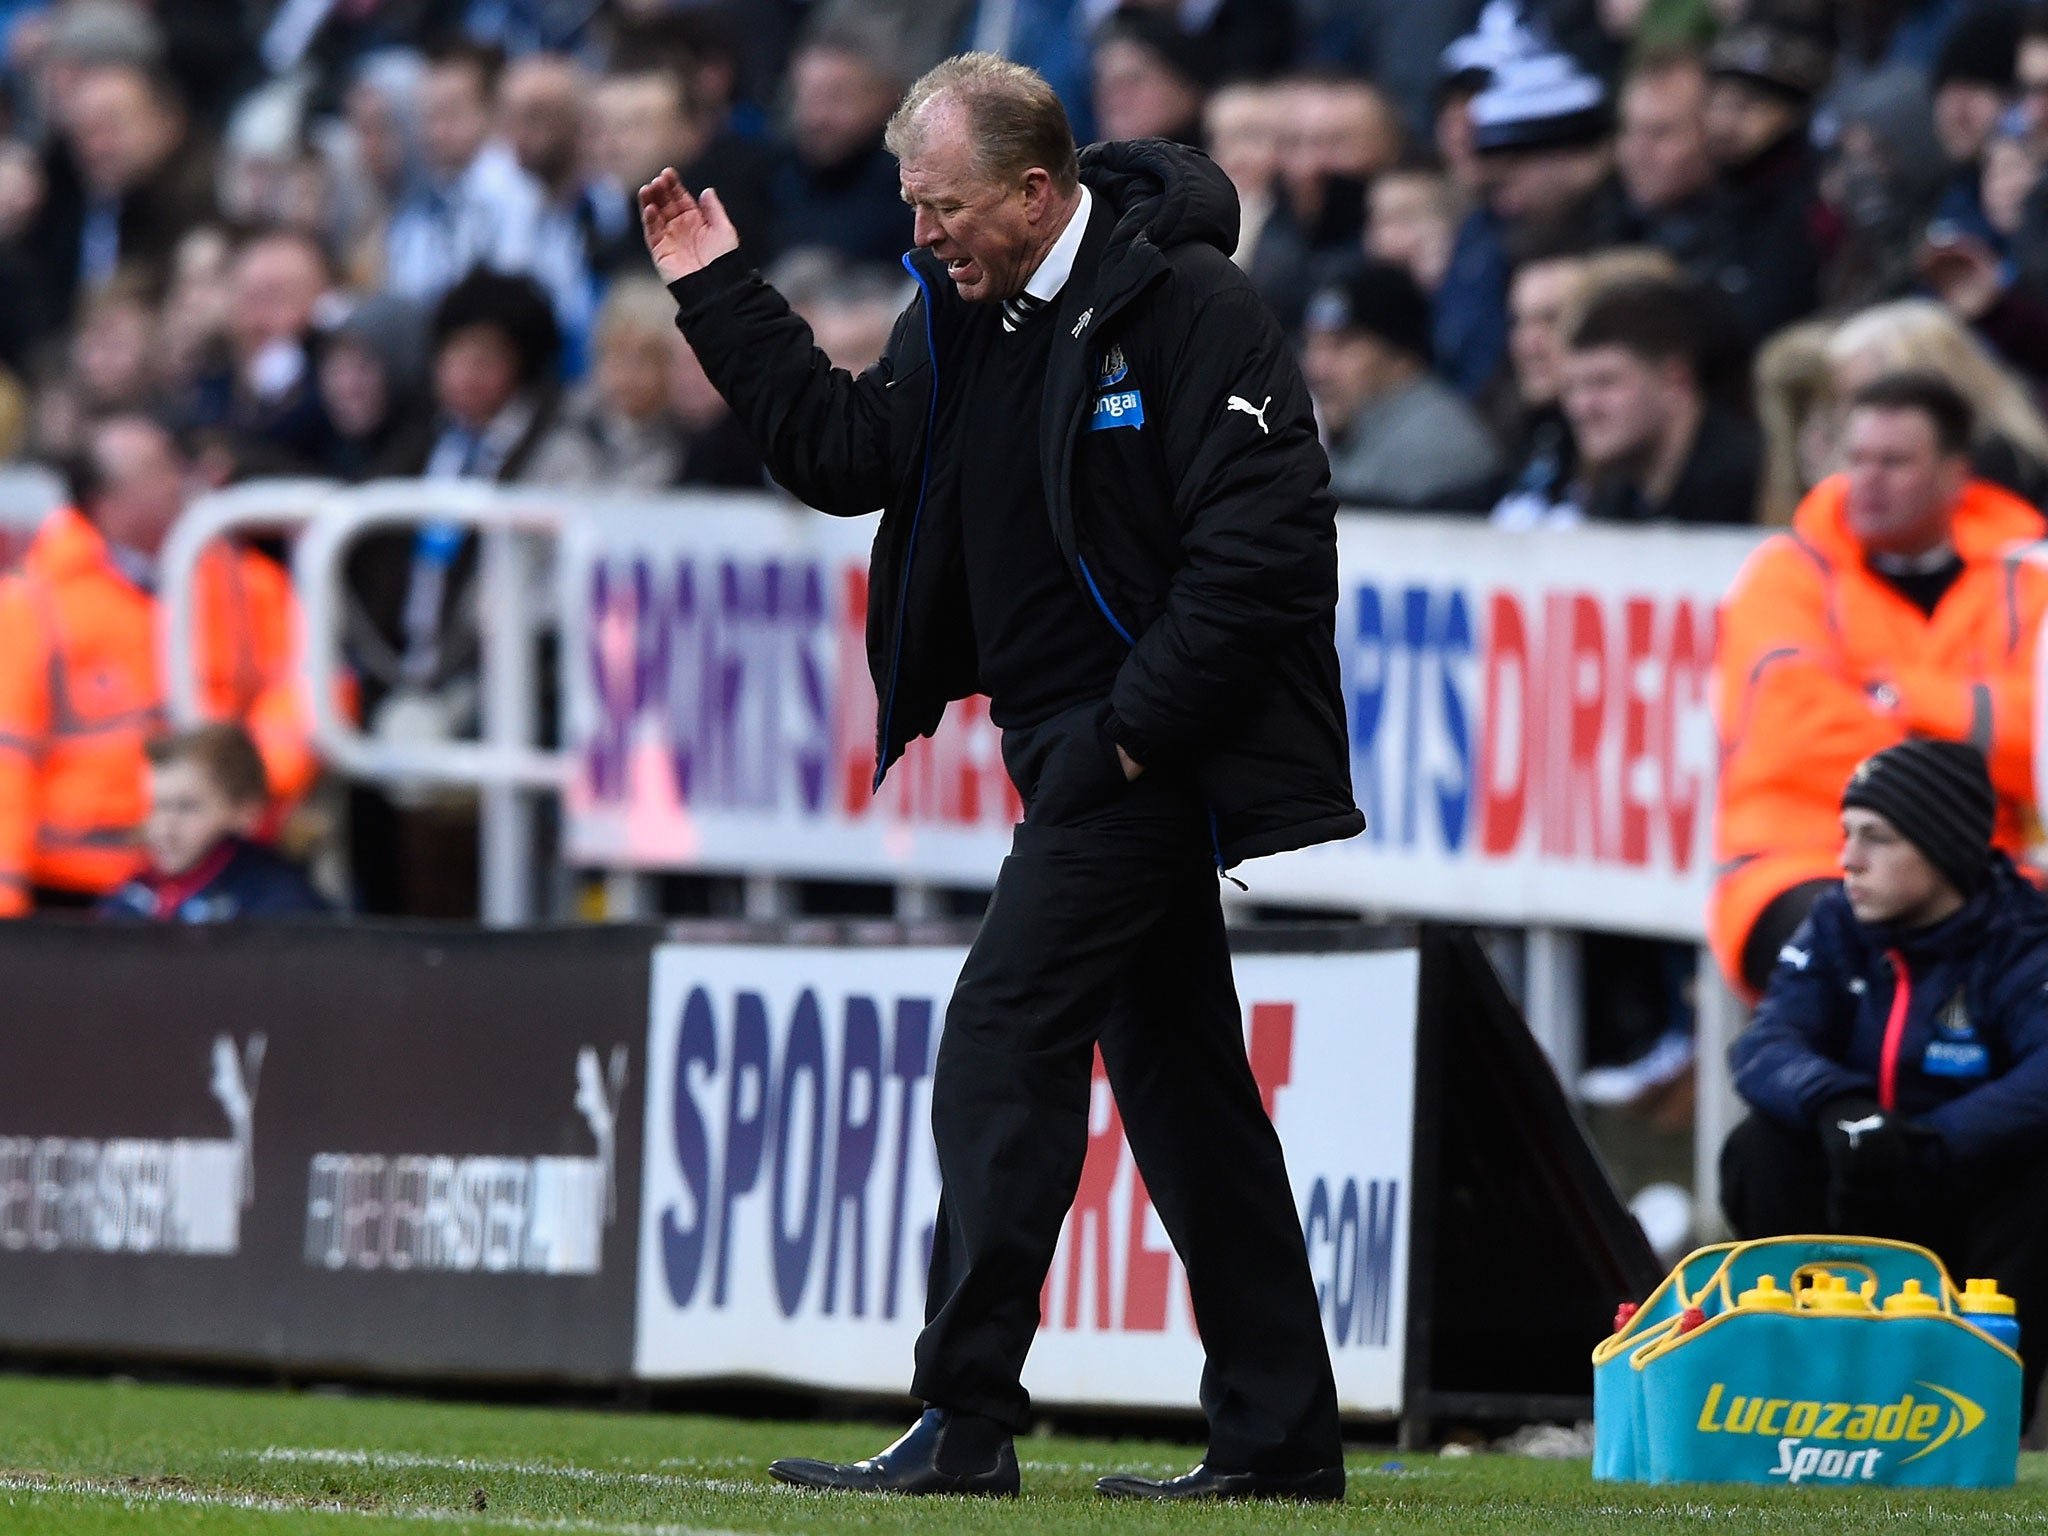 Steve McClaren lost his job at Newcastle after superseding Carr